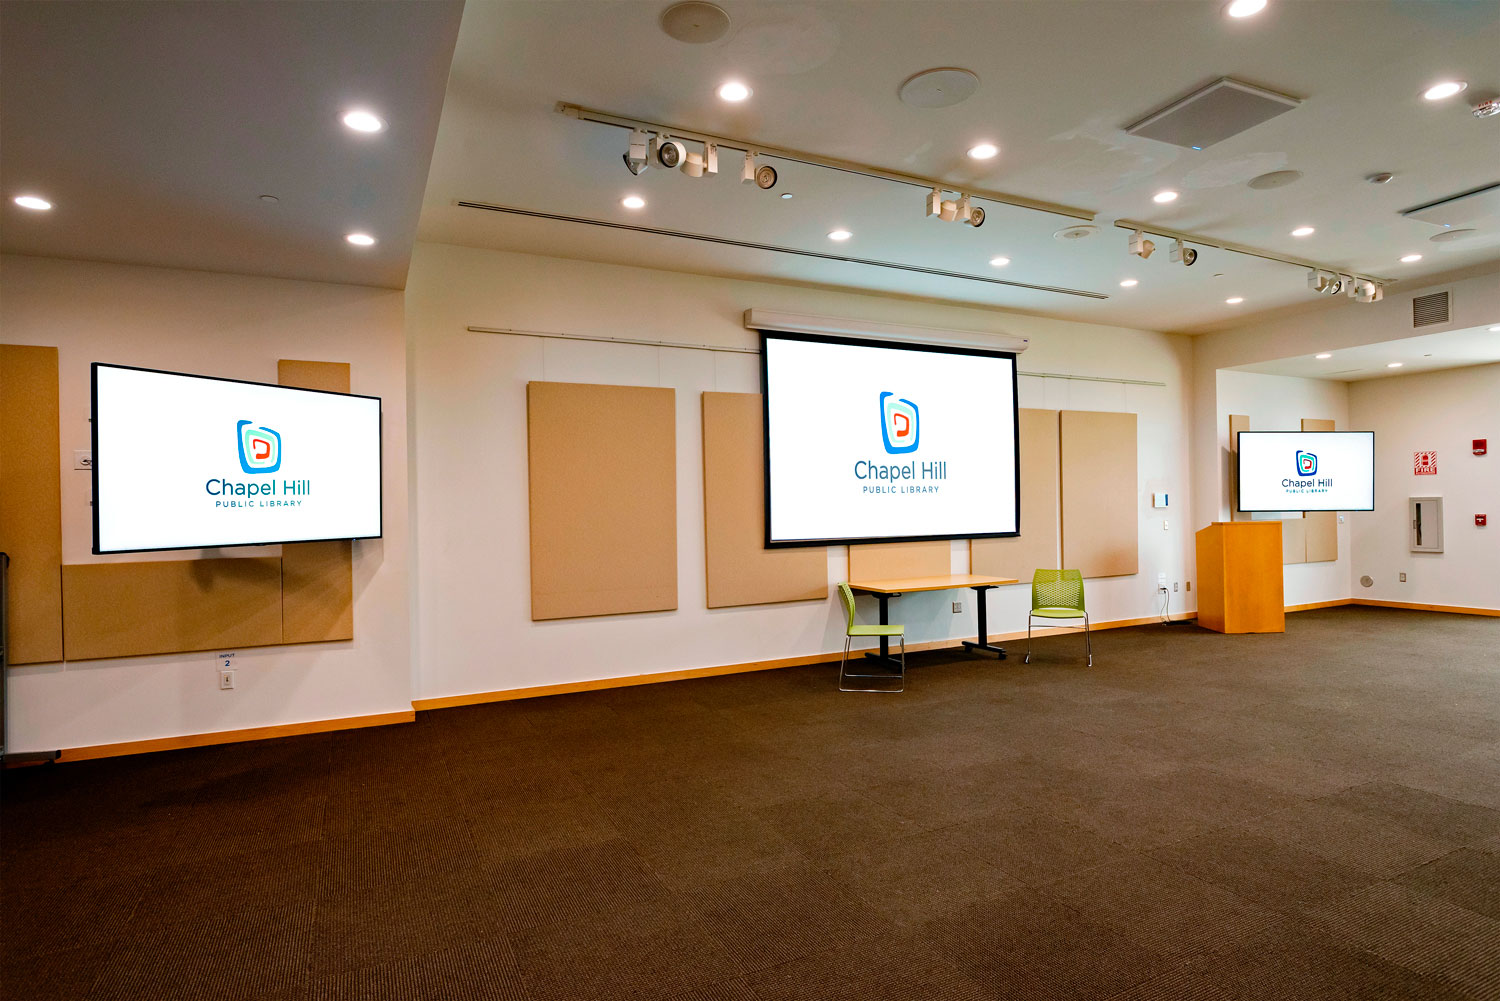 The open environment of the larger meeting rooms enables tables and chairs to be arranged to suit a wide variety of events and activities.